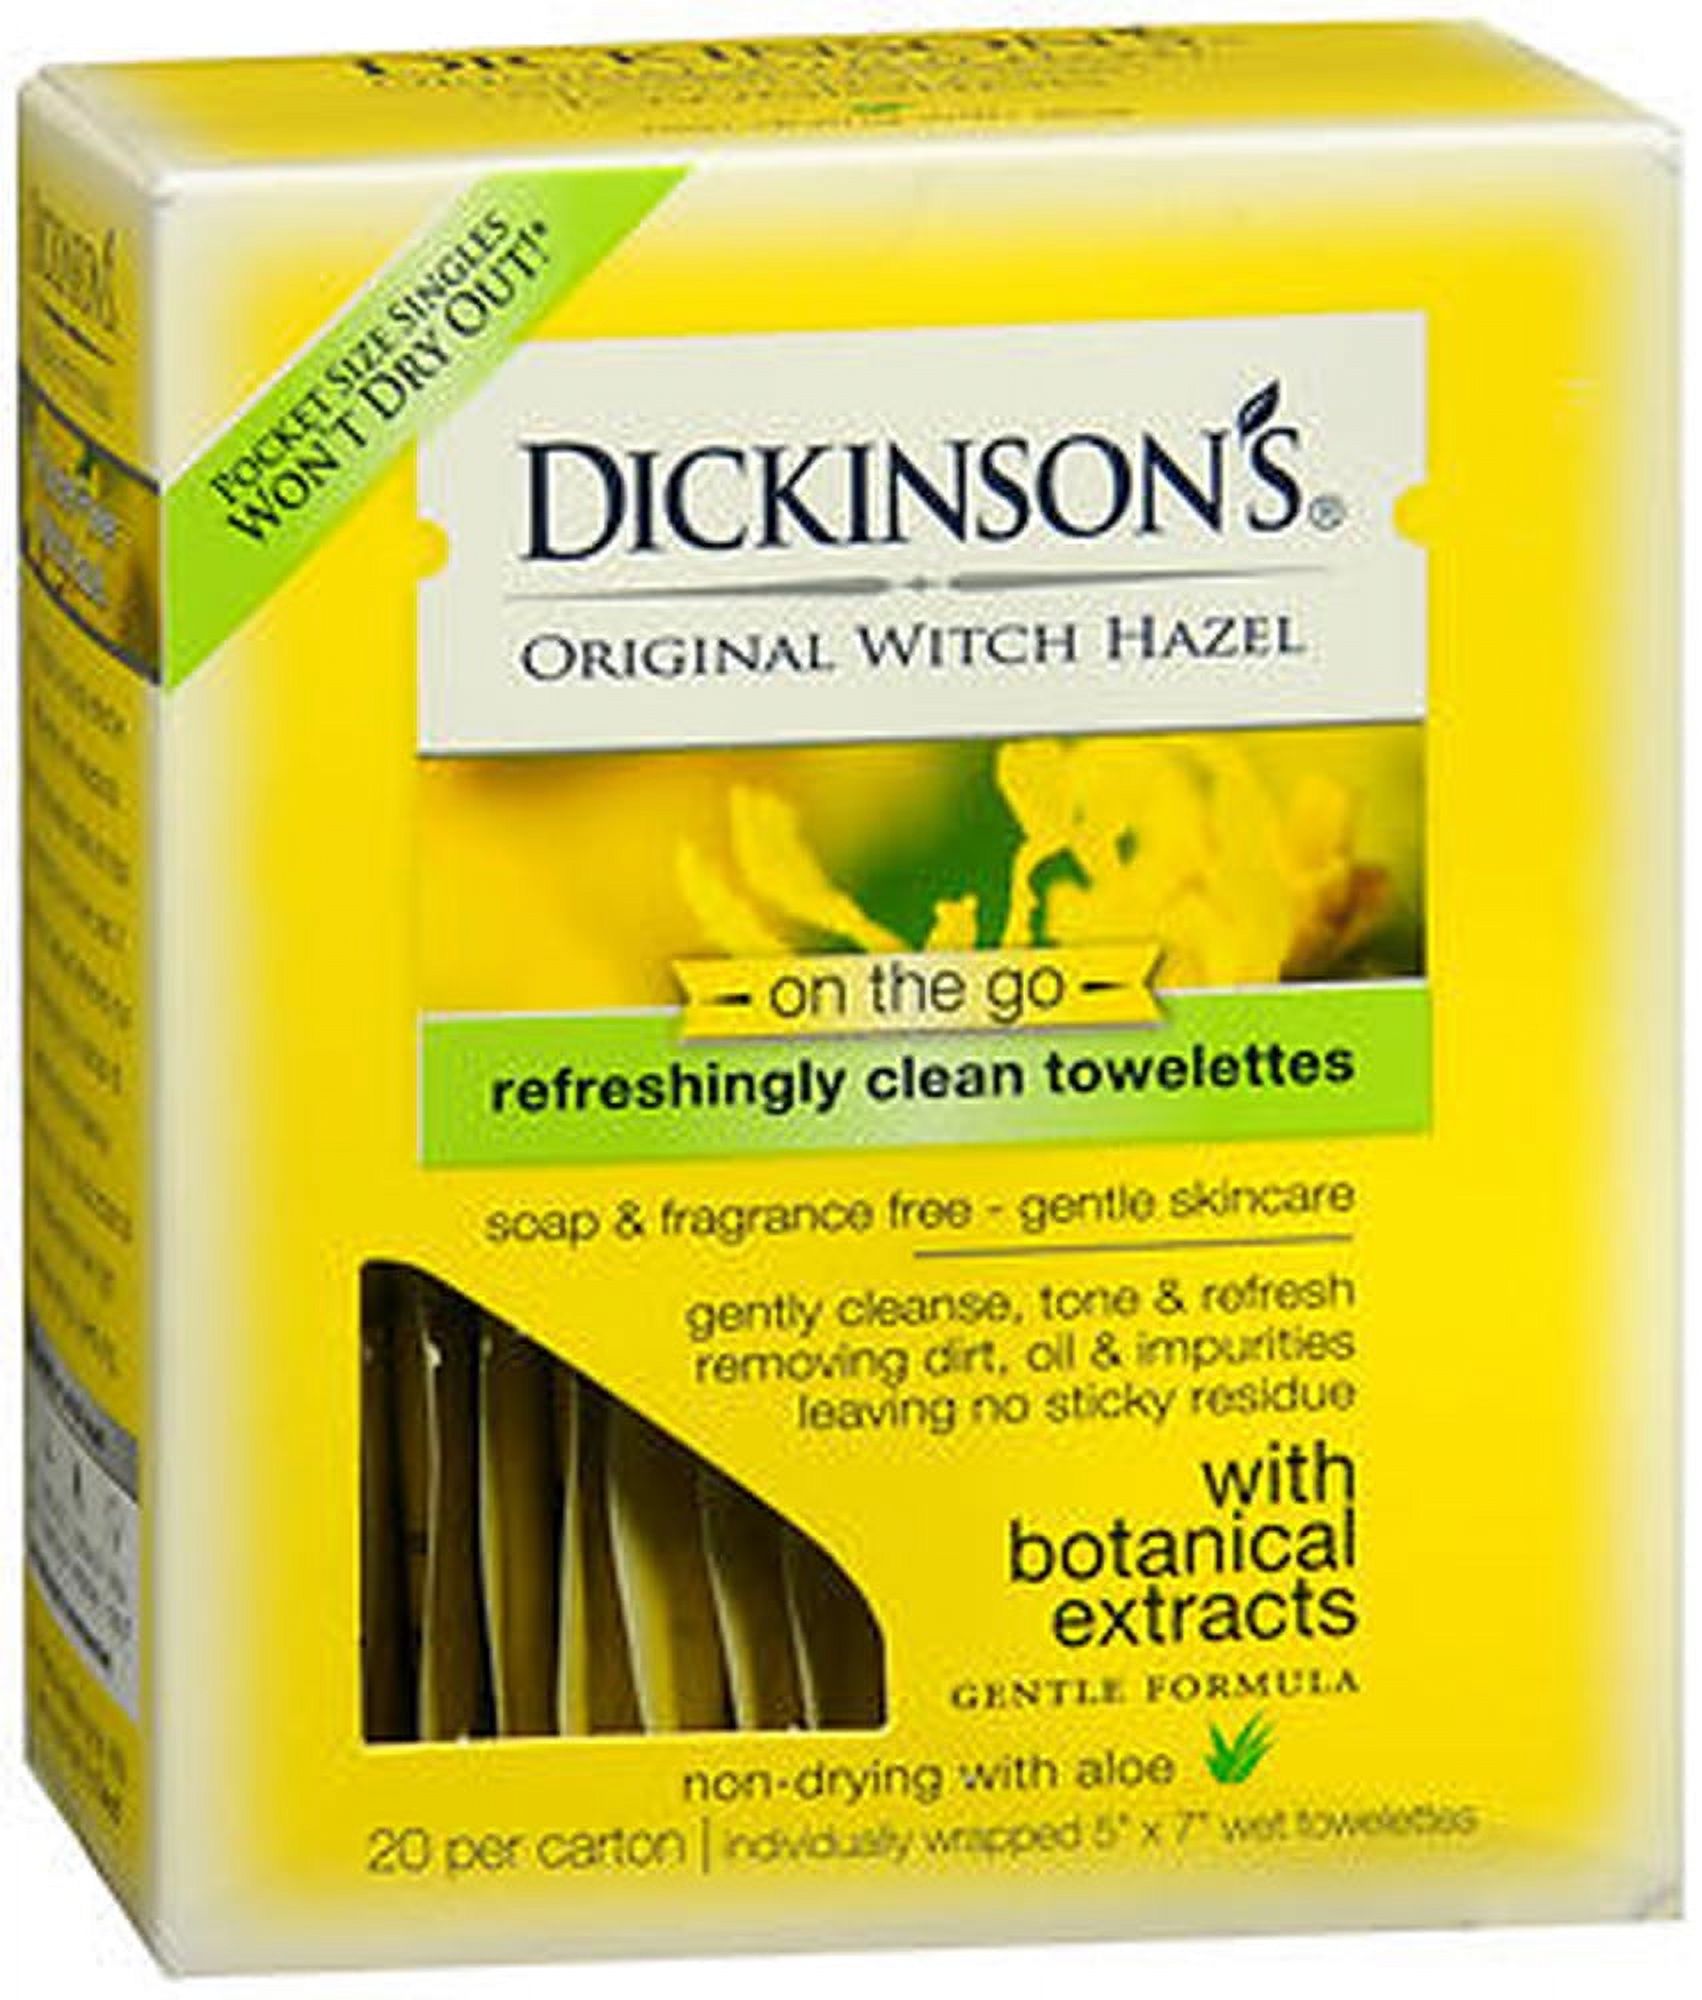 Dickinson's Original Refreshingly Clean Facial Wipes Towelettes, Witch Hazel and Aloe, 20 Ct - image 1 of 7